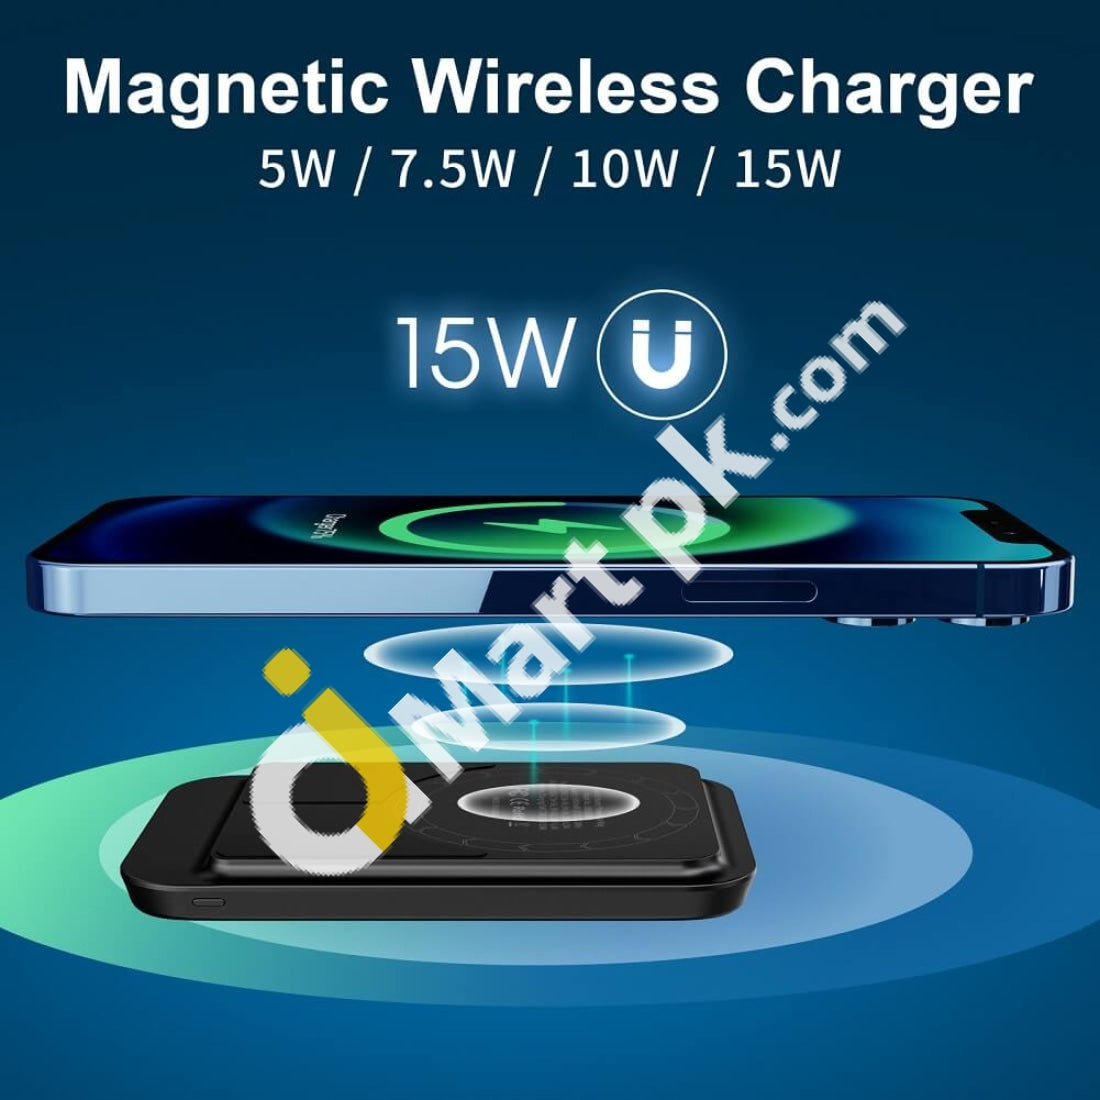 Iwalk Powergrip Mag 6000Mah Magnetic Wireless Portable Charger Finger Holder Stand - Imported From